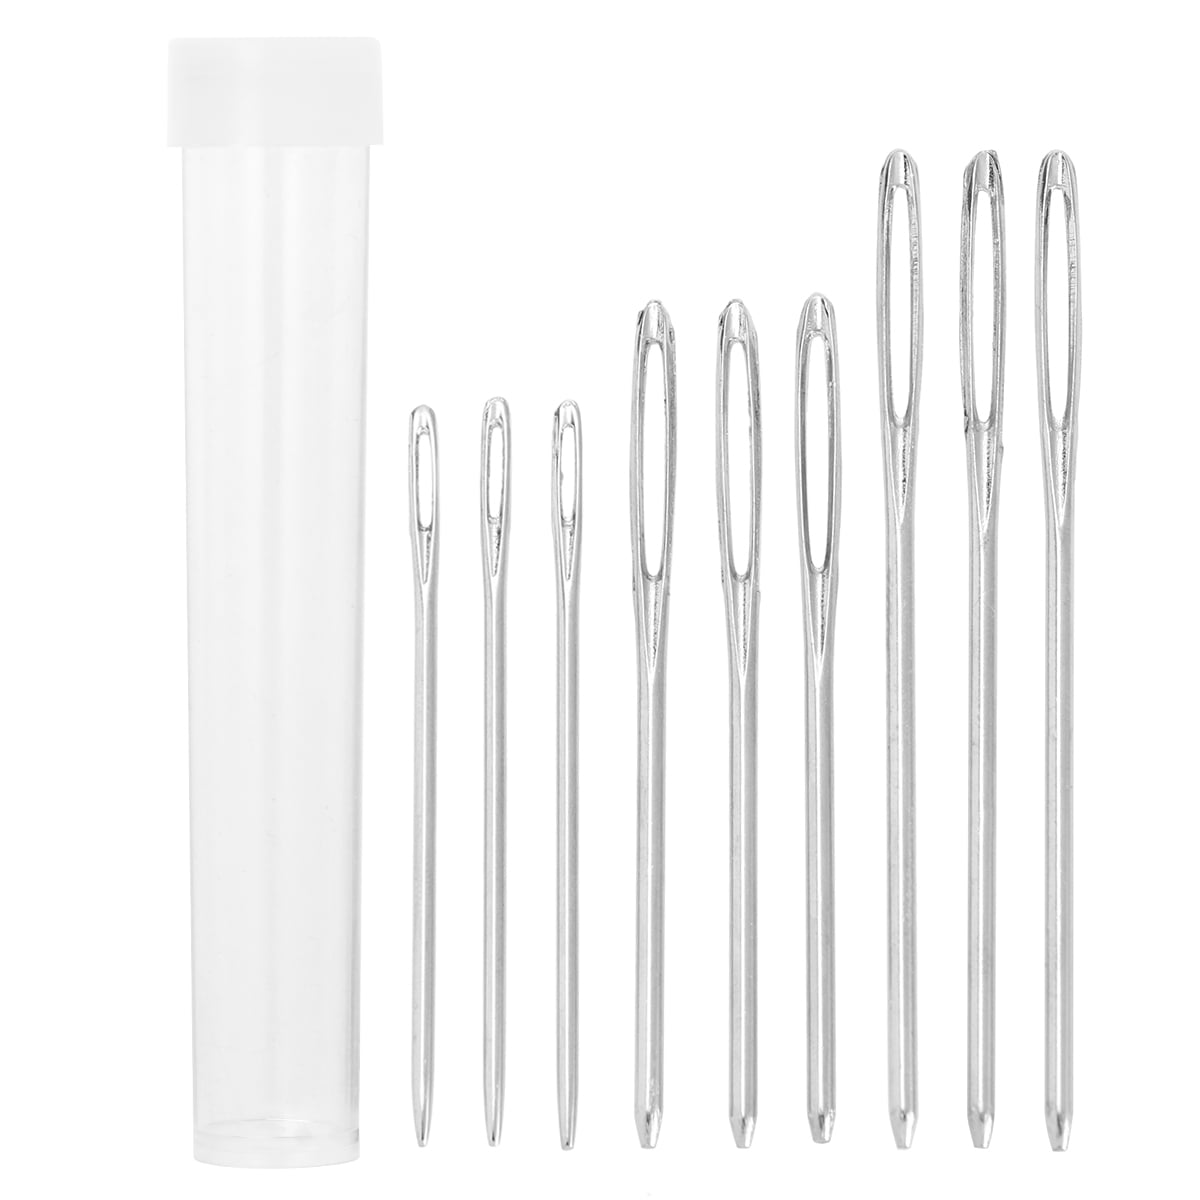 18 Pieces Steel Large-Eye Blunt Needles, Yarn Tapestry darning Embroidery  Knitting Needles Sewing Needles Assorted Size 